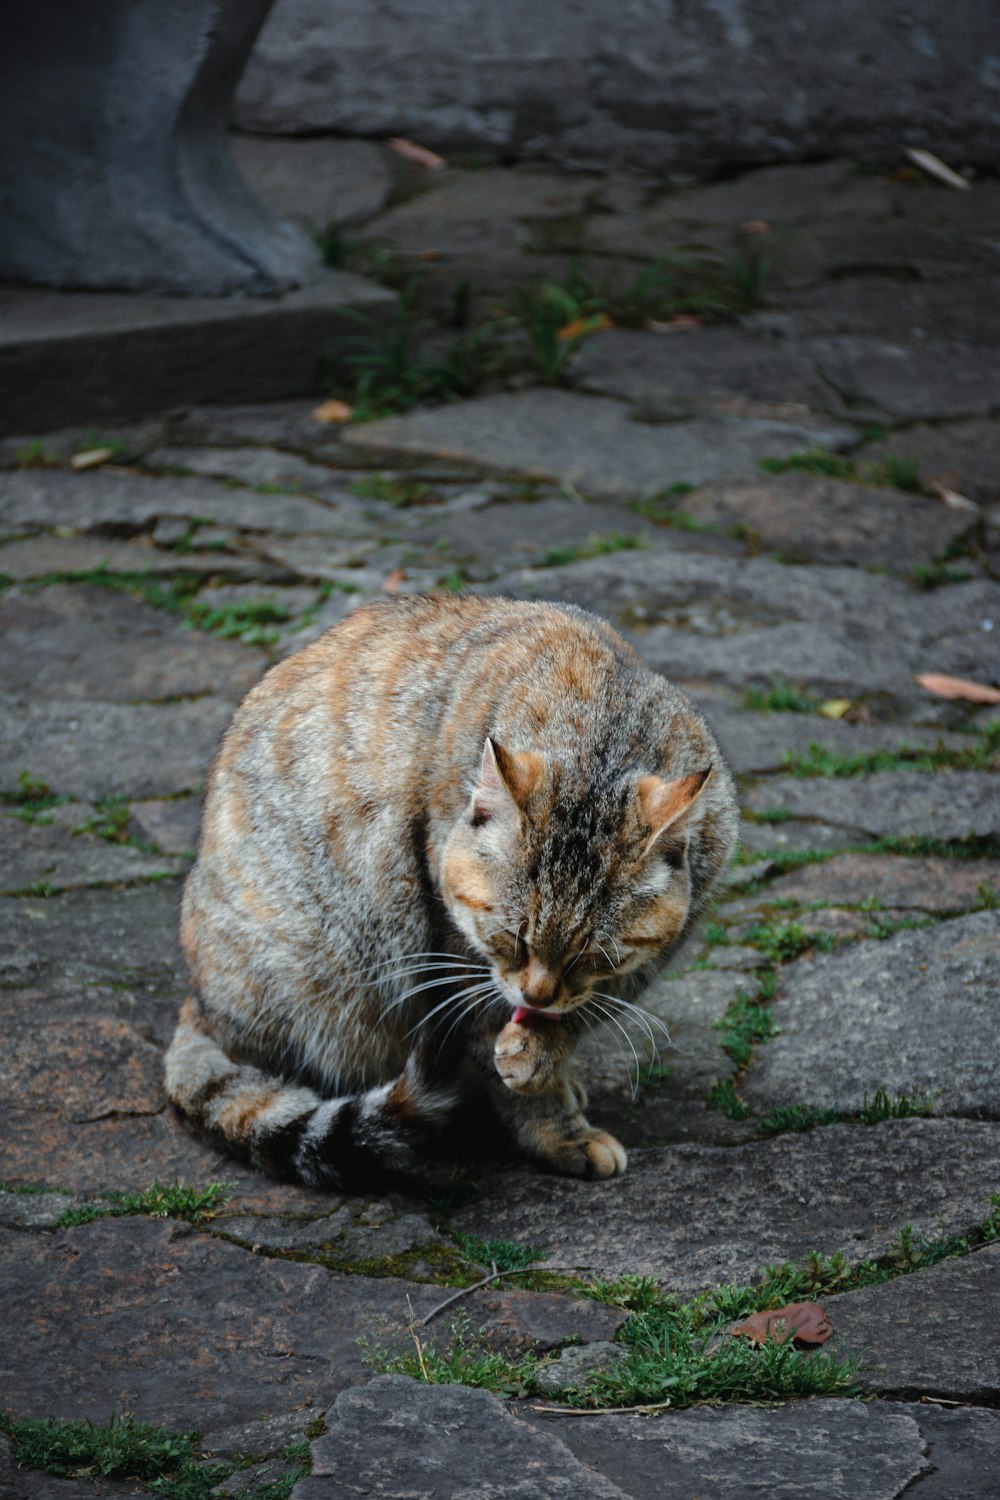 a cat sitting on the ground with its mouth open